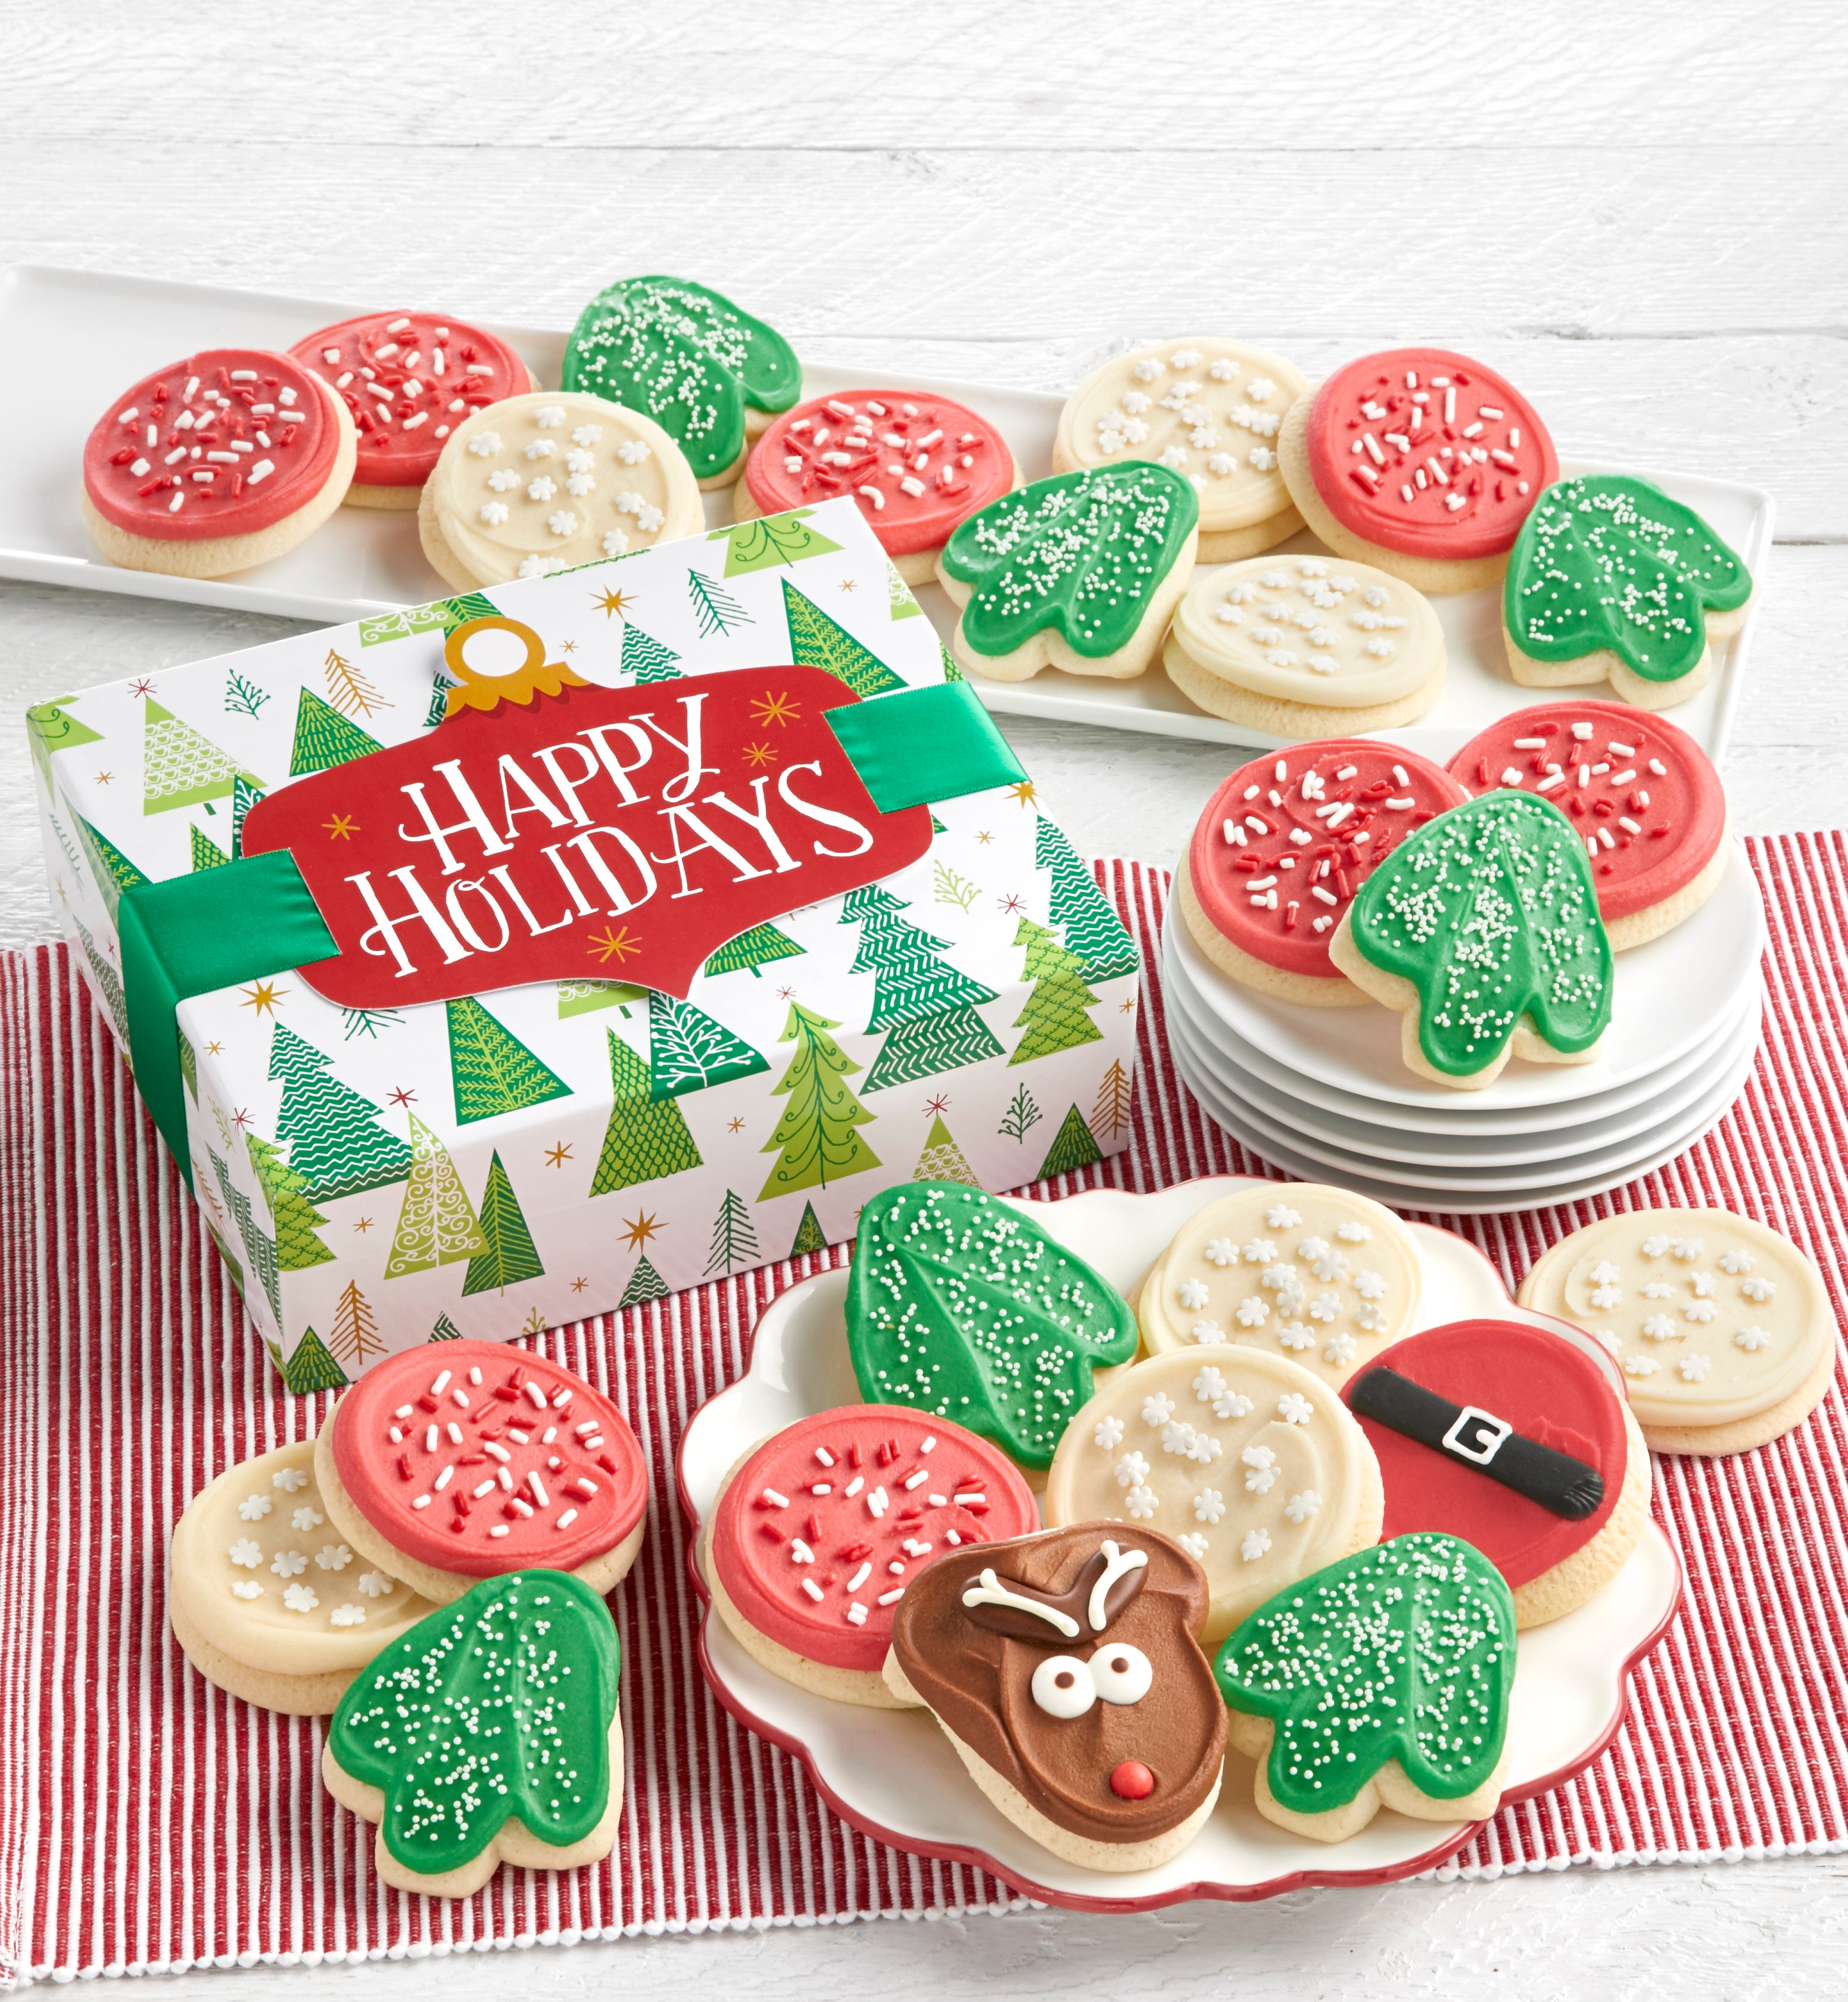 Cheryl's Happy Holidays Cut Out Cookie Gift Box